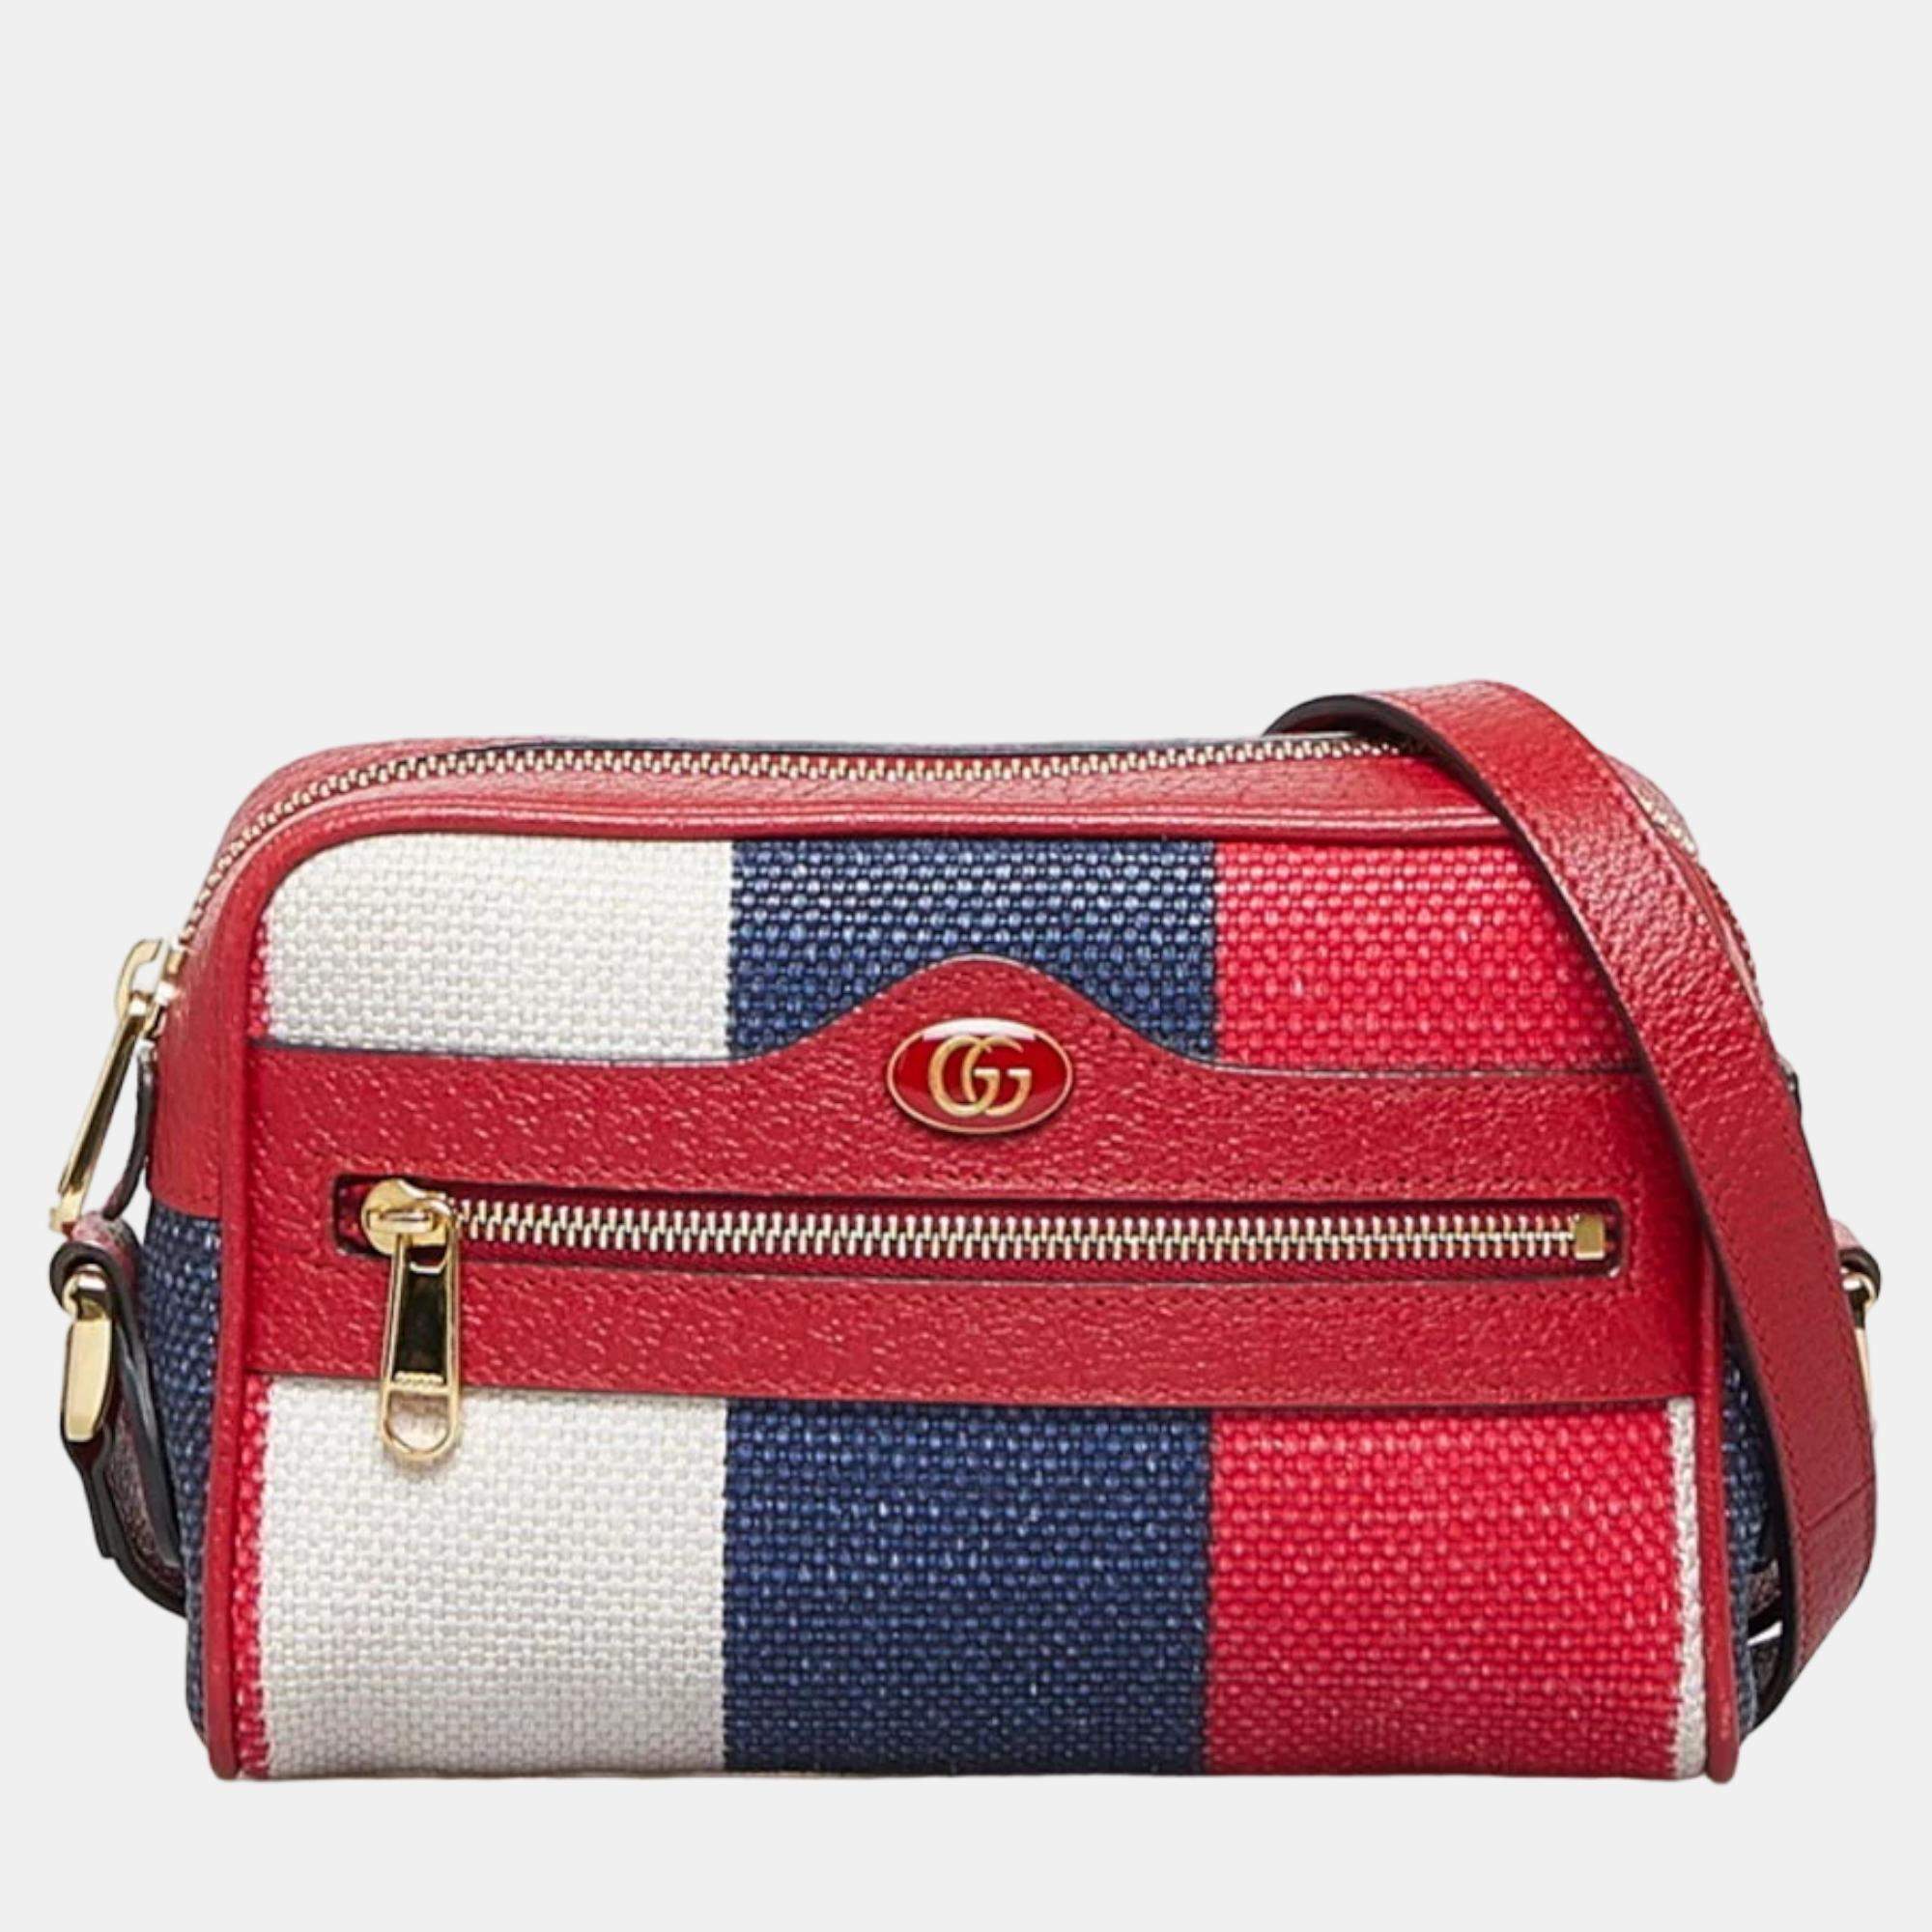 Gucci Ophidia Mini Bags & Handbags for Women for sale